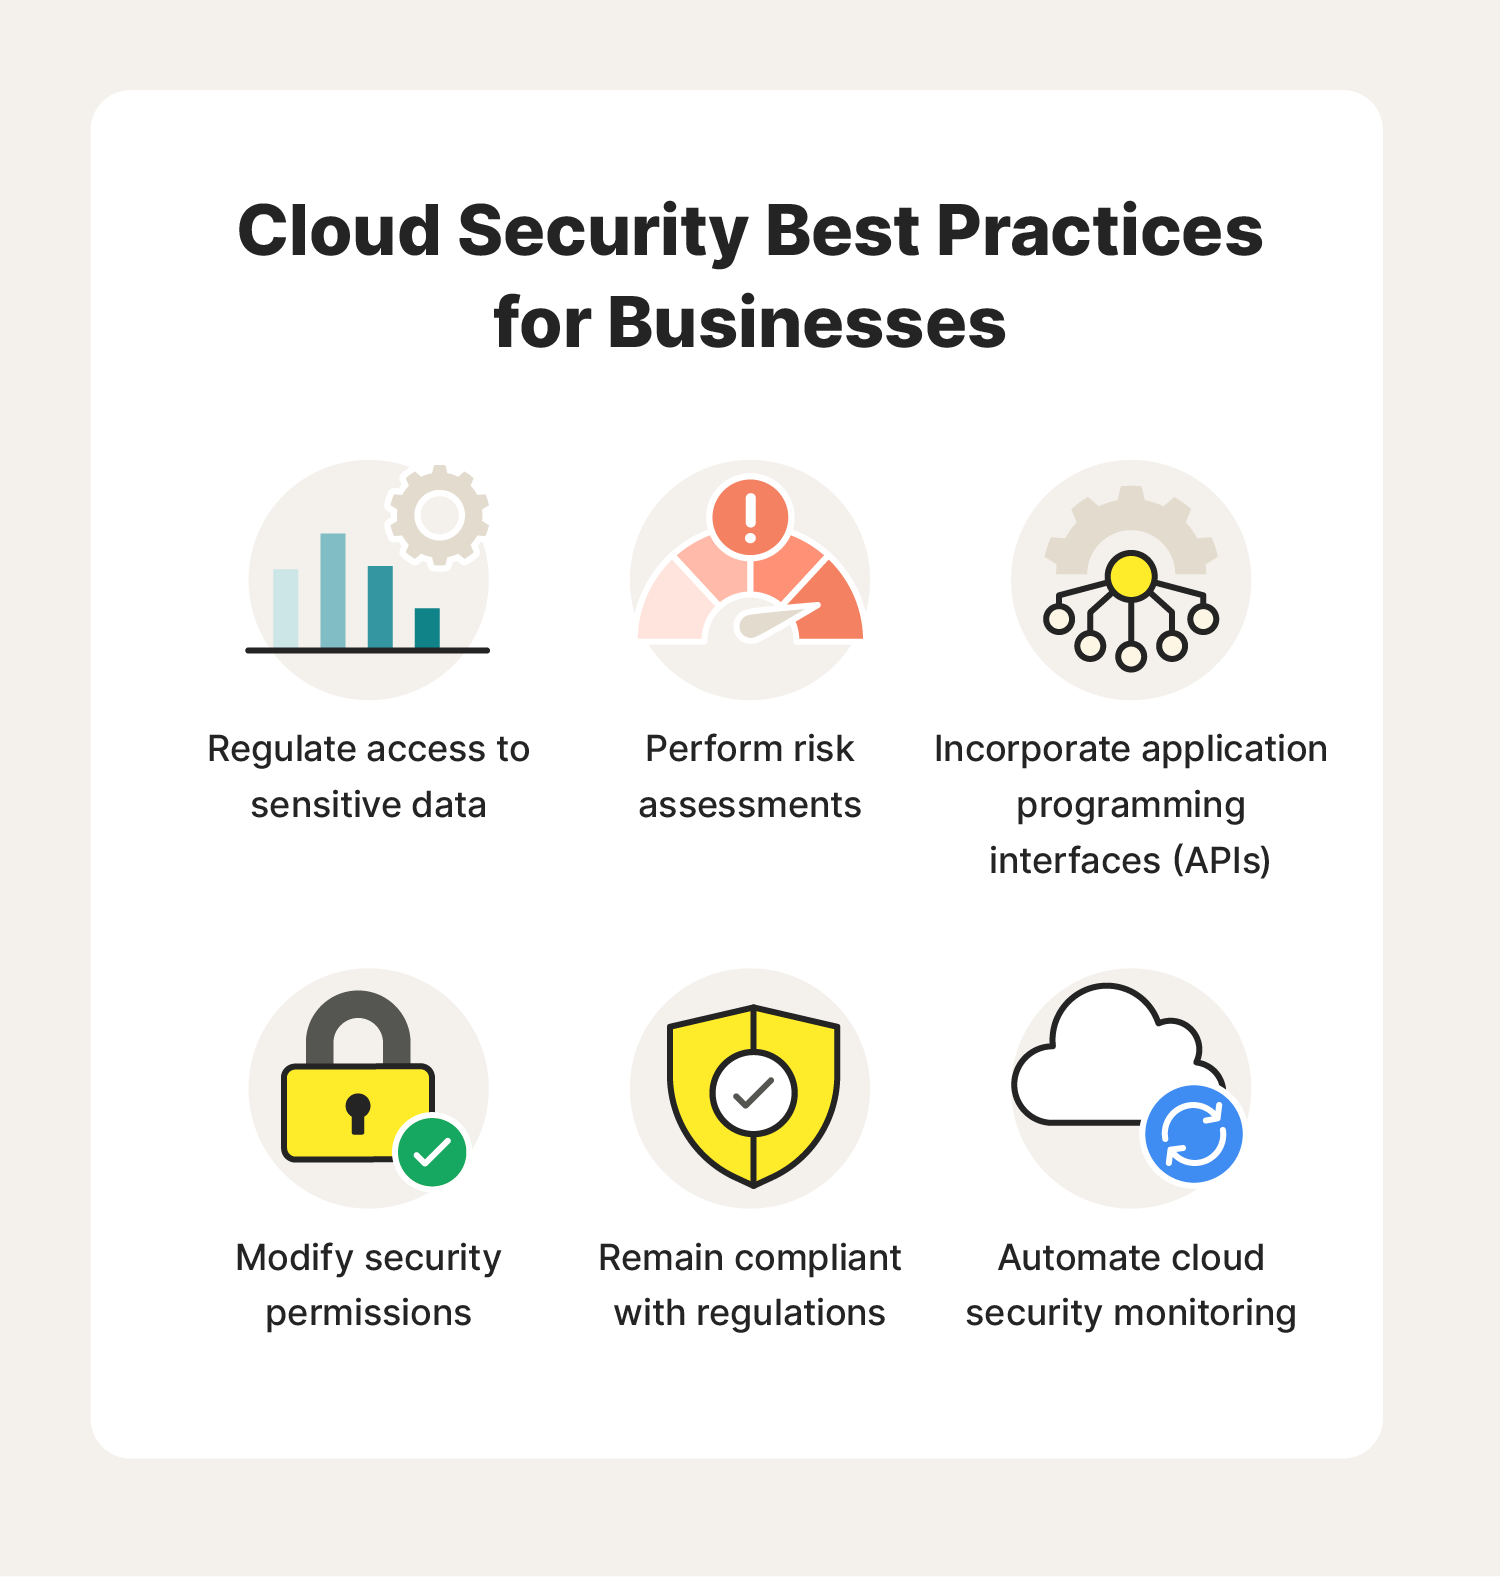 A few reasons cloud security is important.